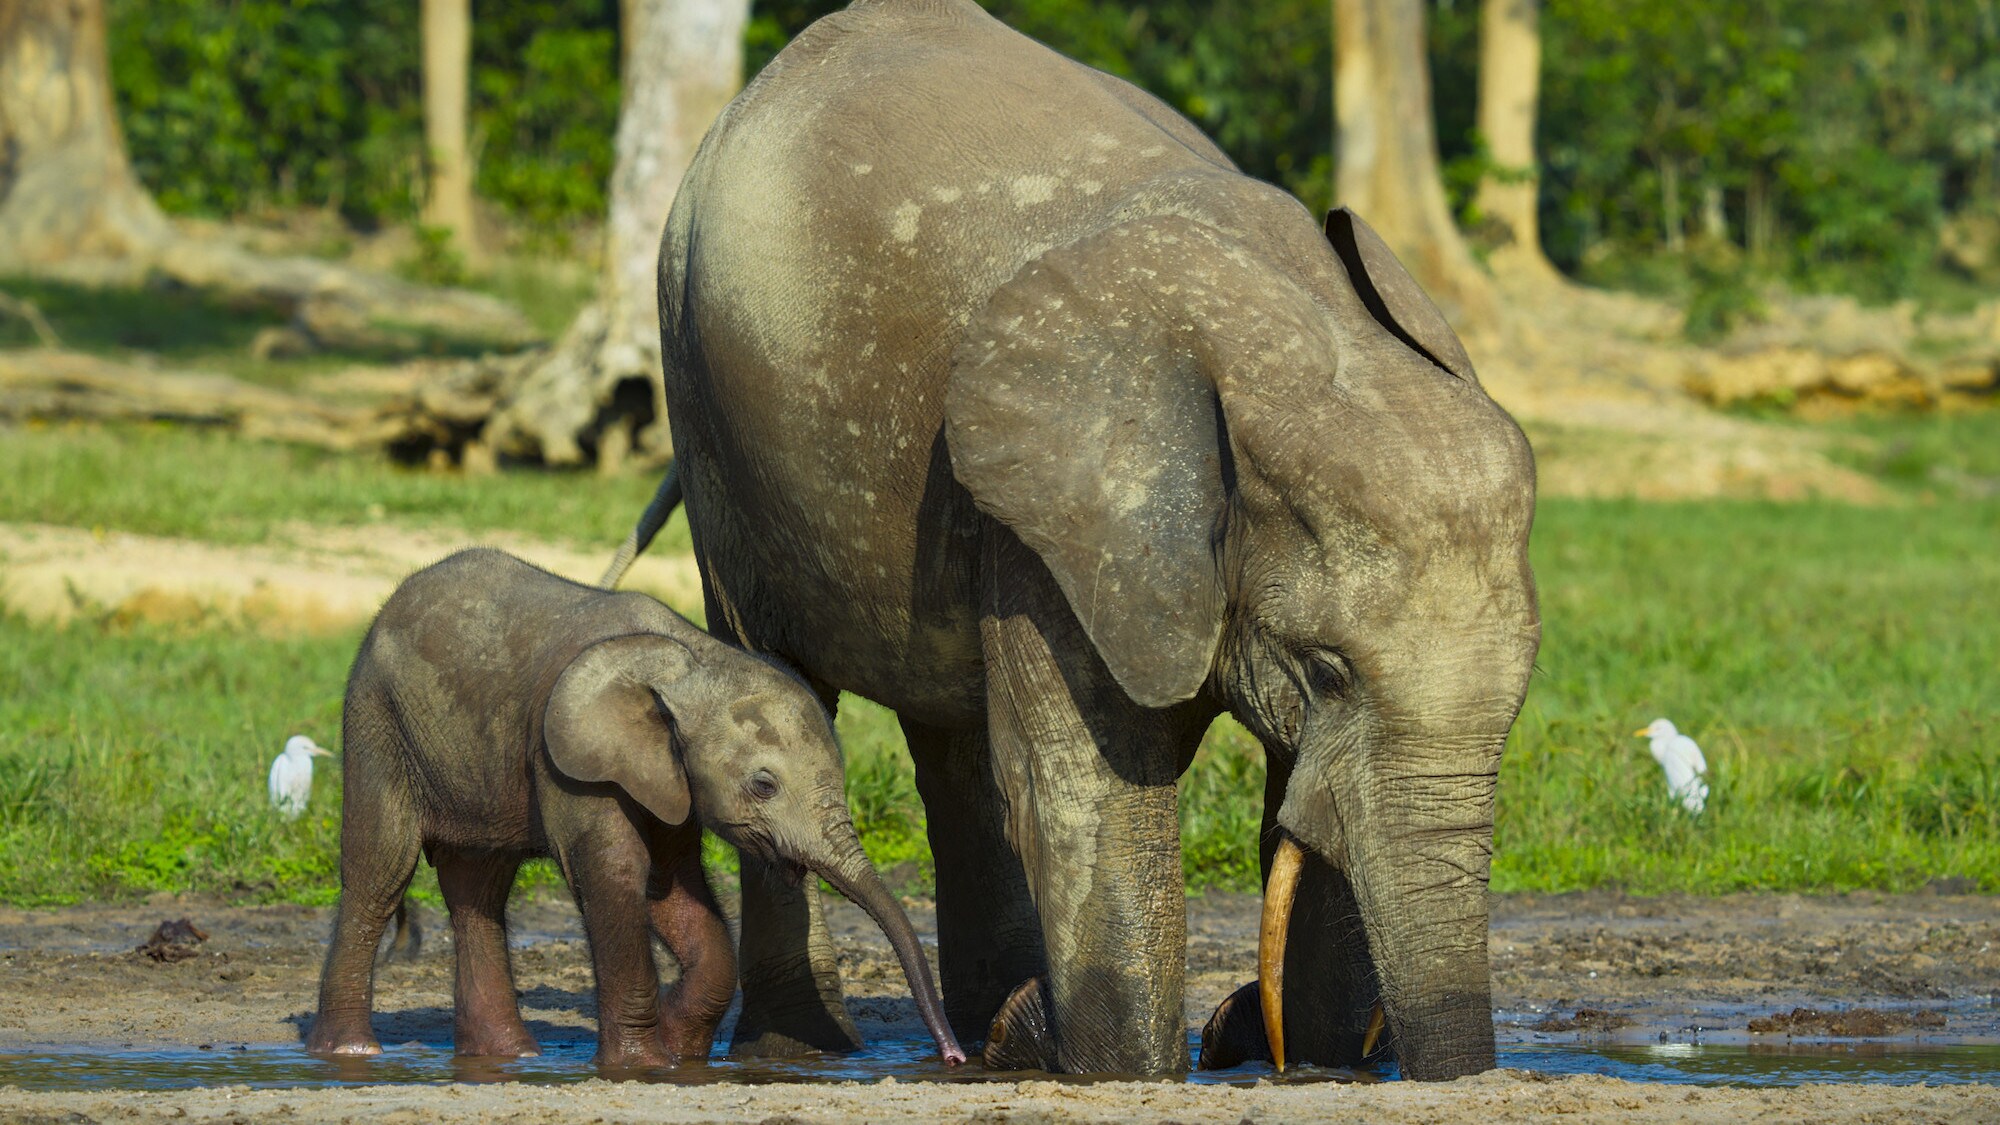 Elephant and calf at the waterhole. (National Geographic for Disney+/Bertie Gregory)